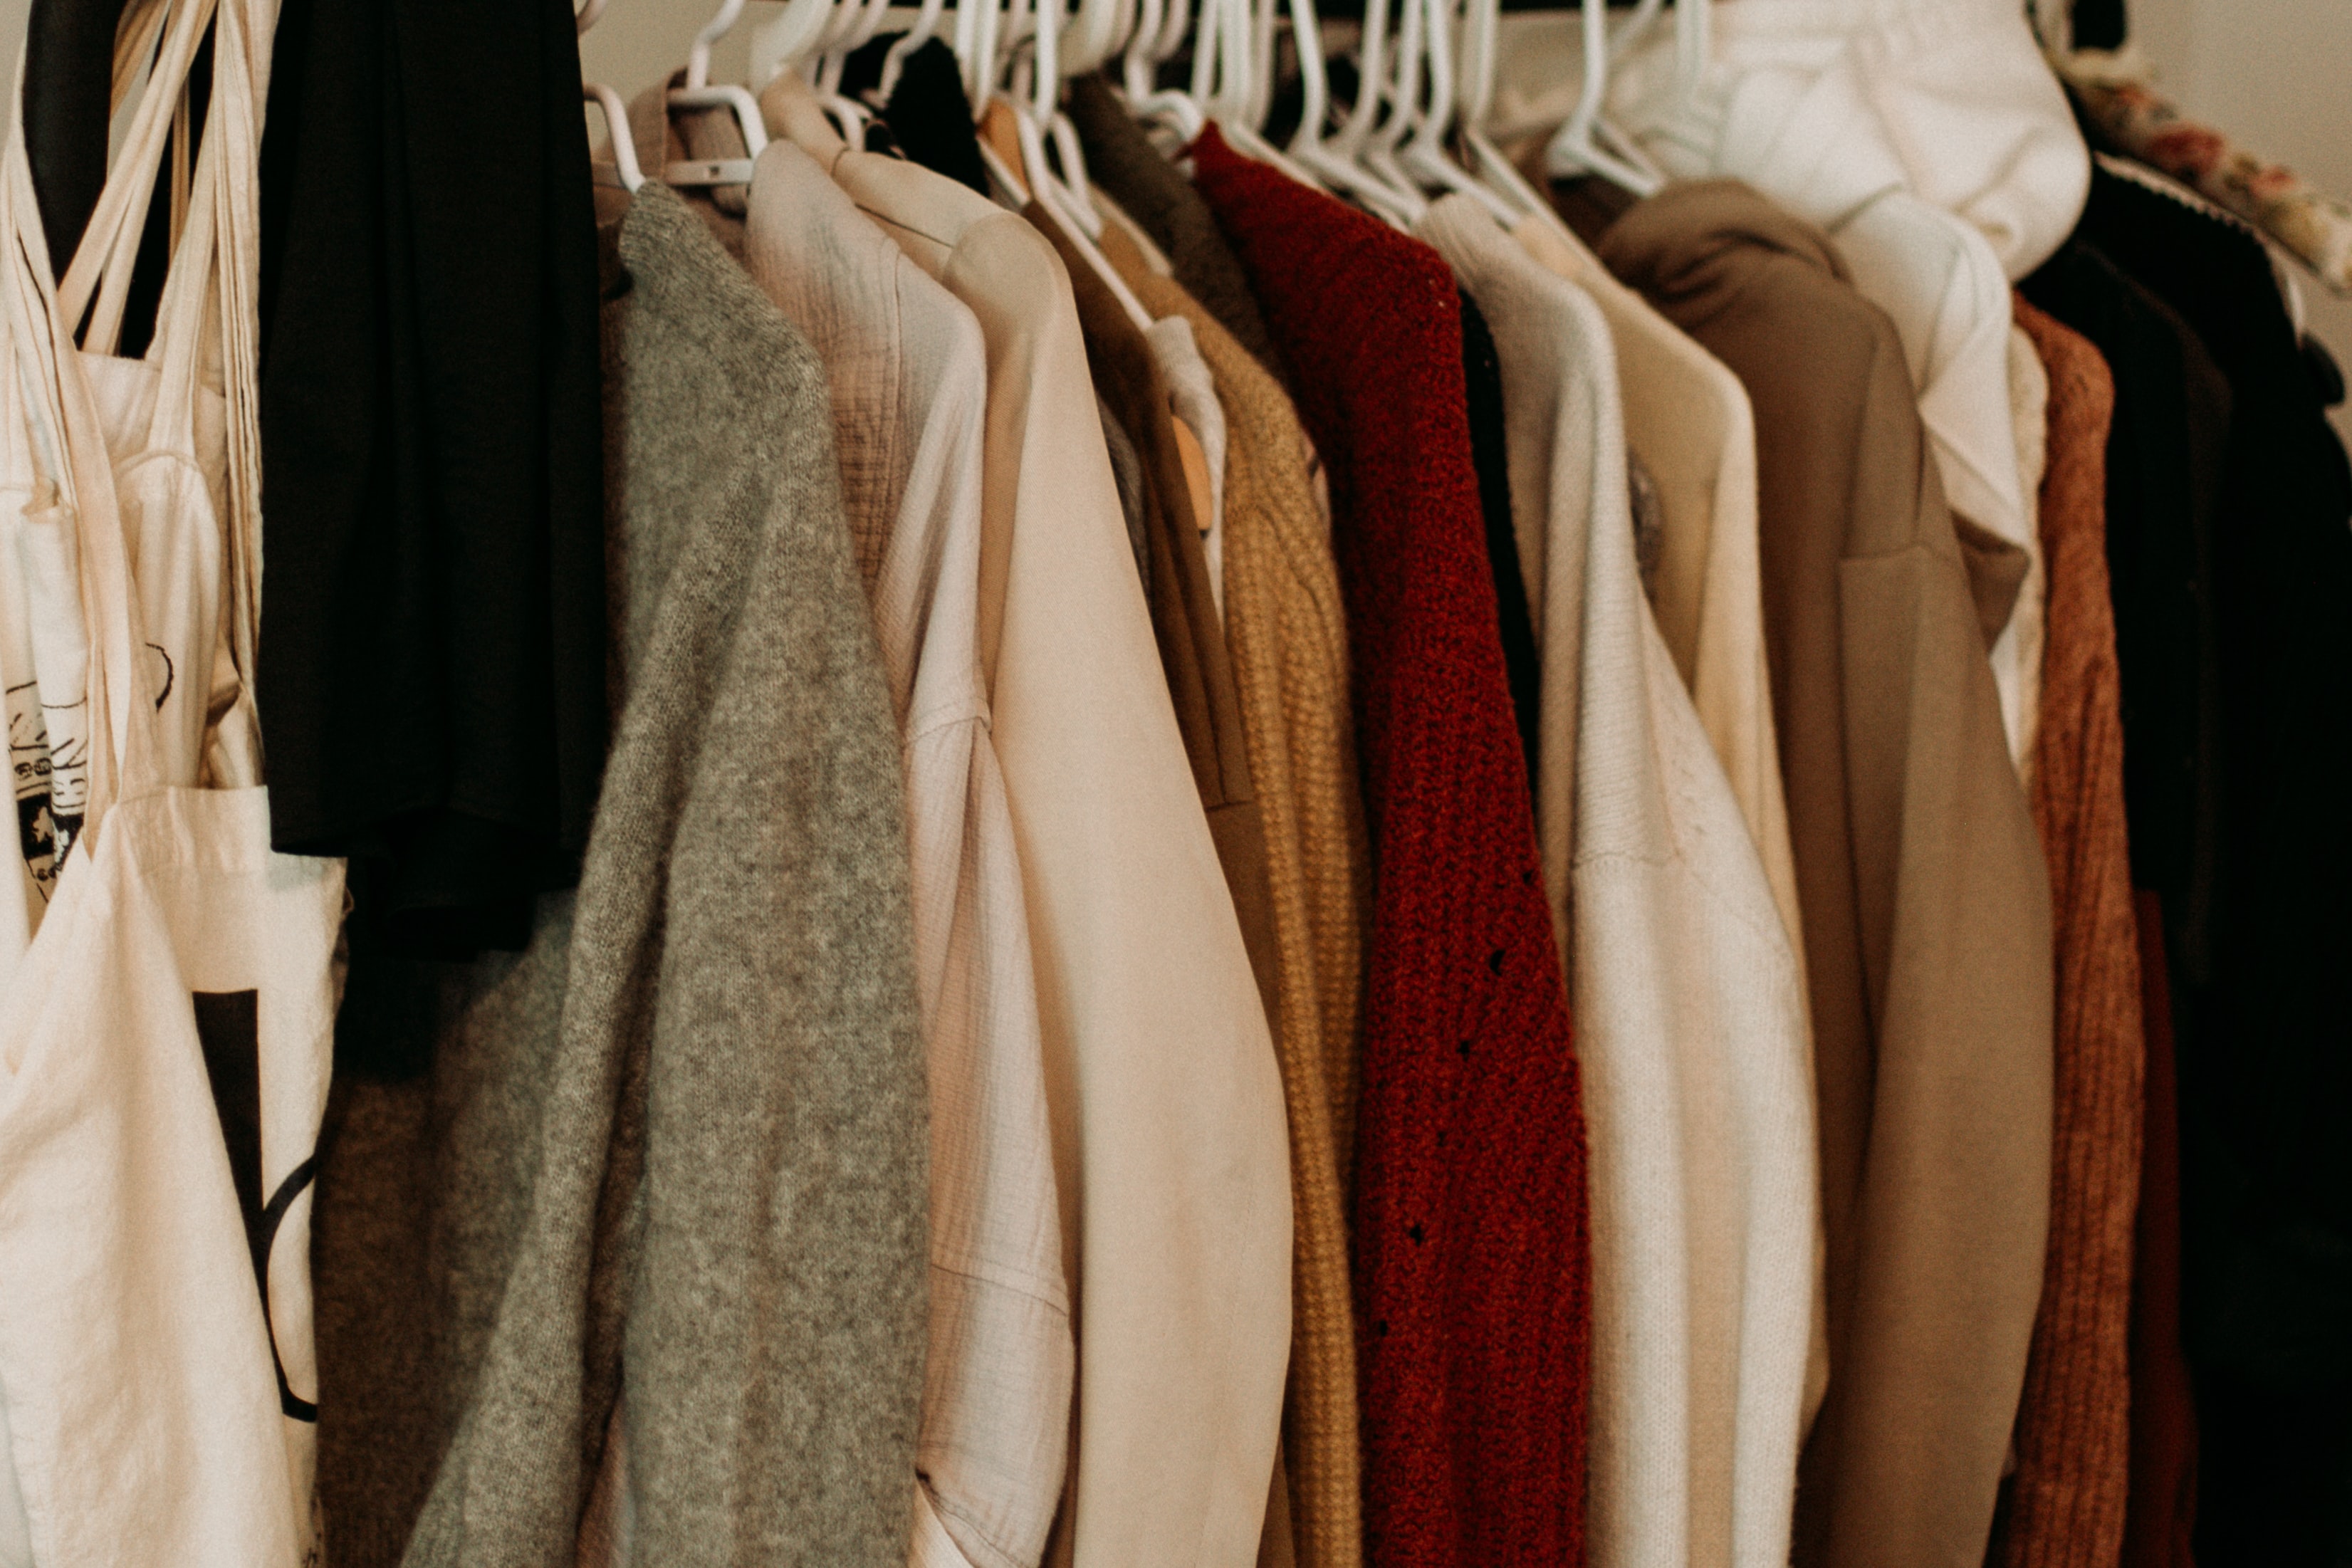 As students look to build their professional wardrobe, Career Services is providing opportunities to assist.